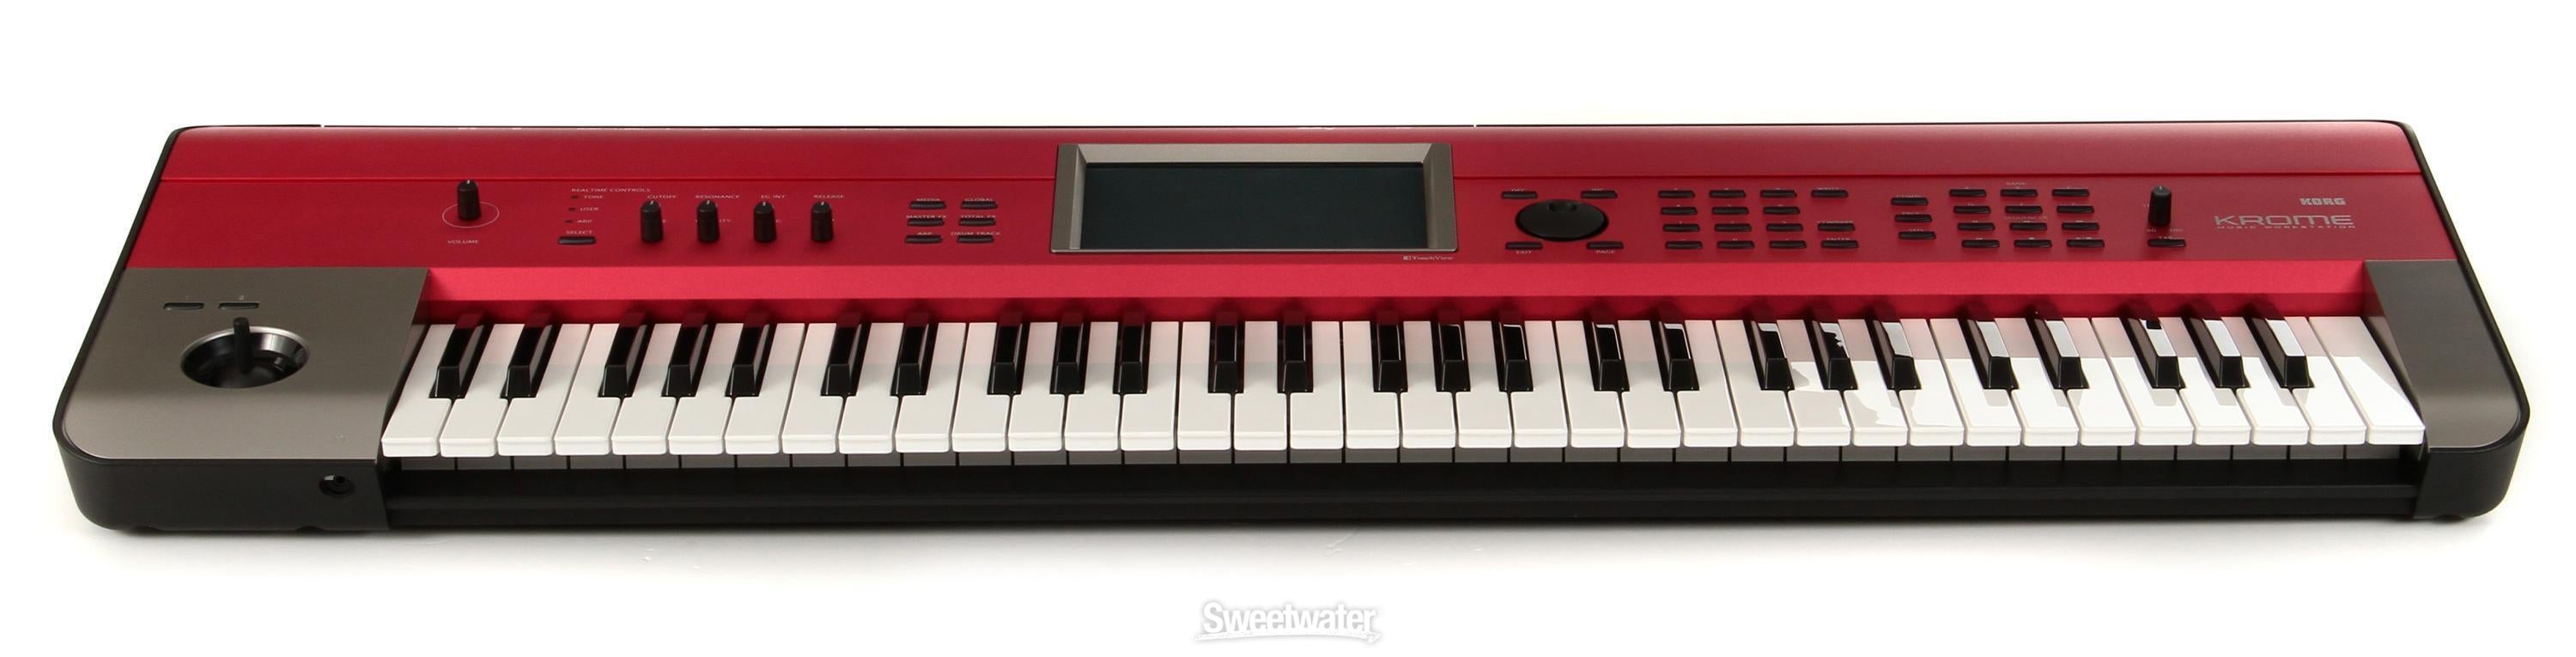 Korg Krome 61-Key Synthesizer Workstation - Red Limited Edition